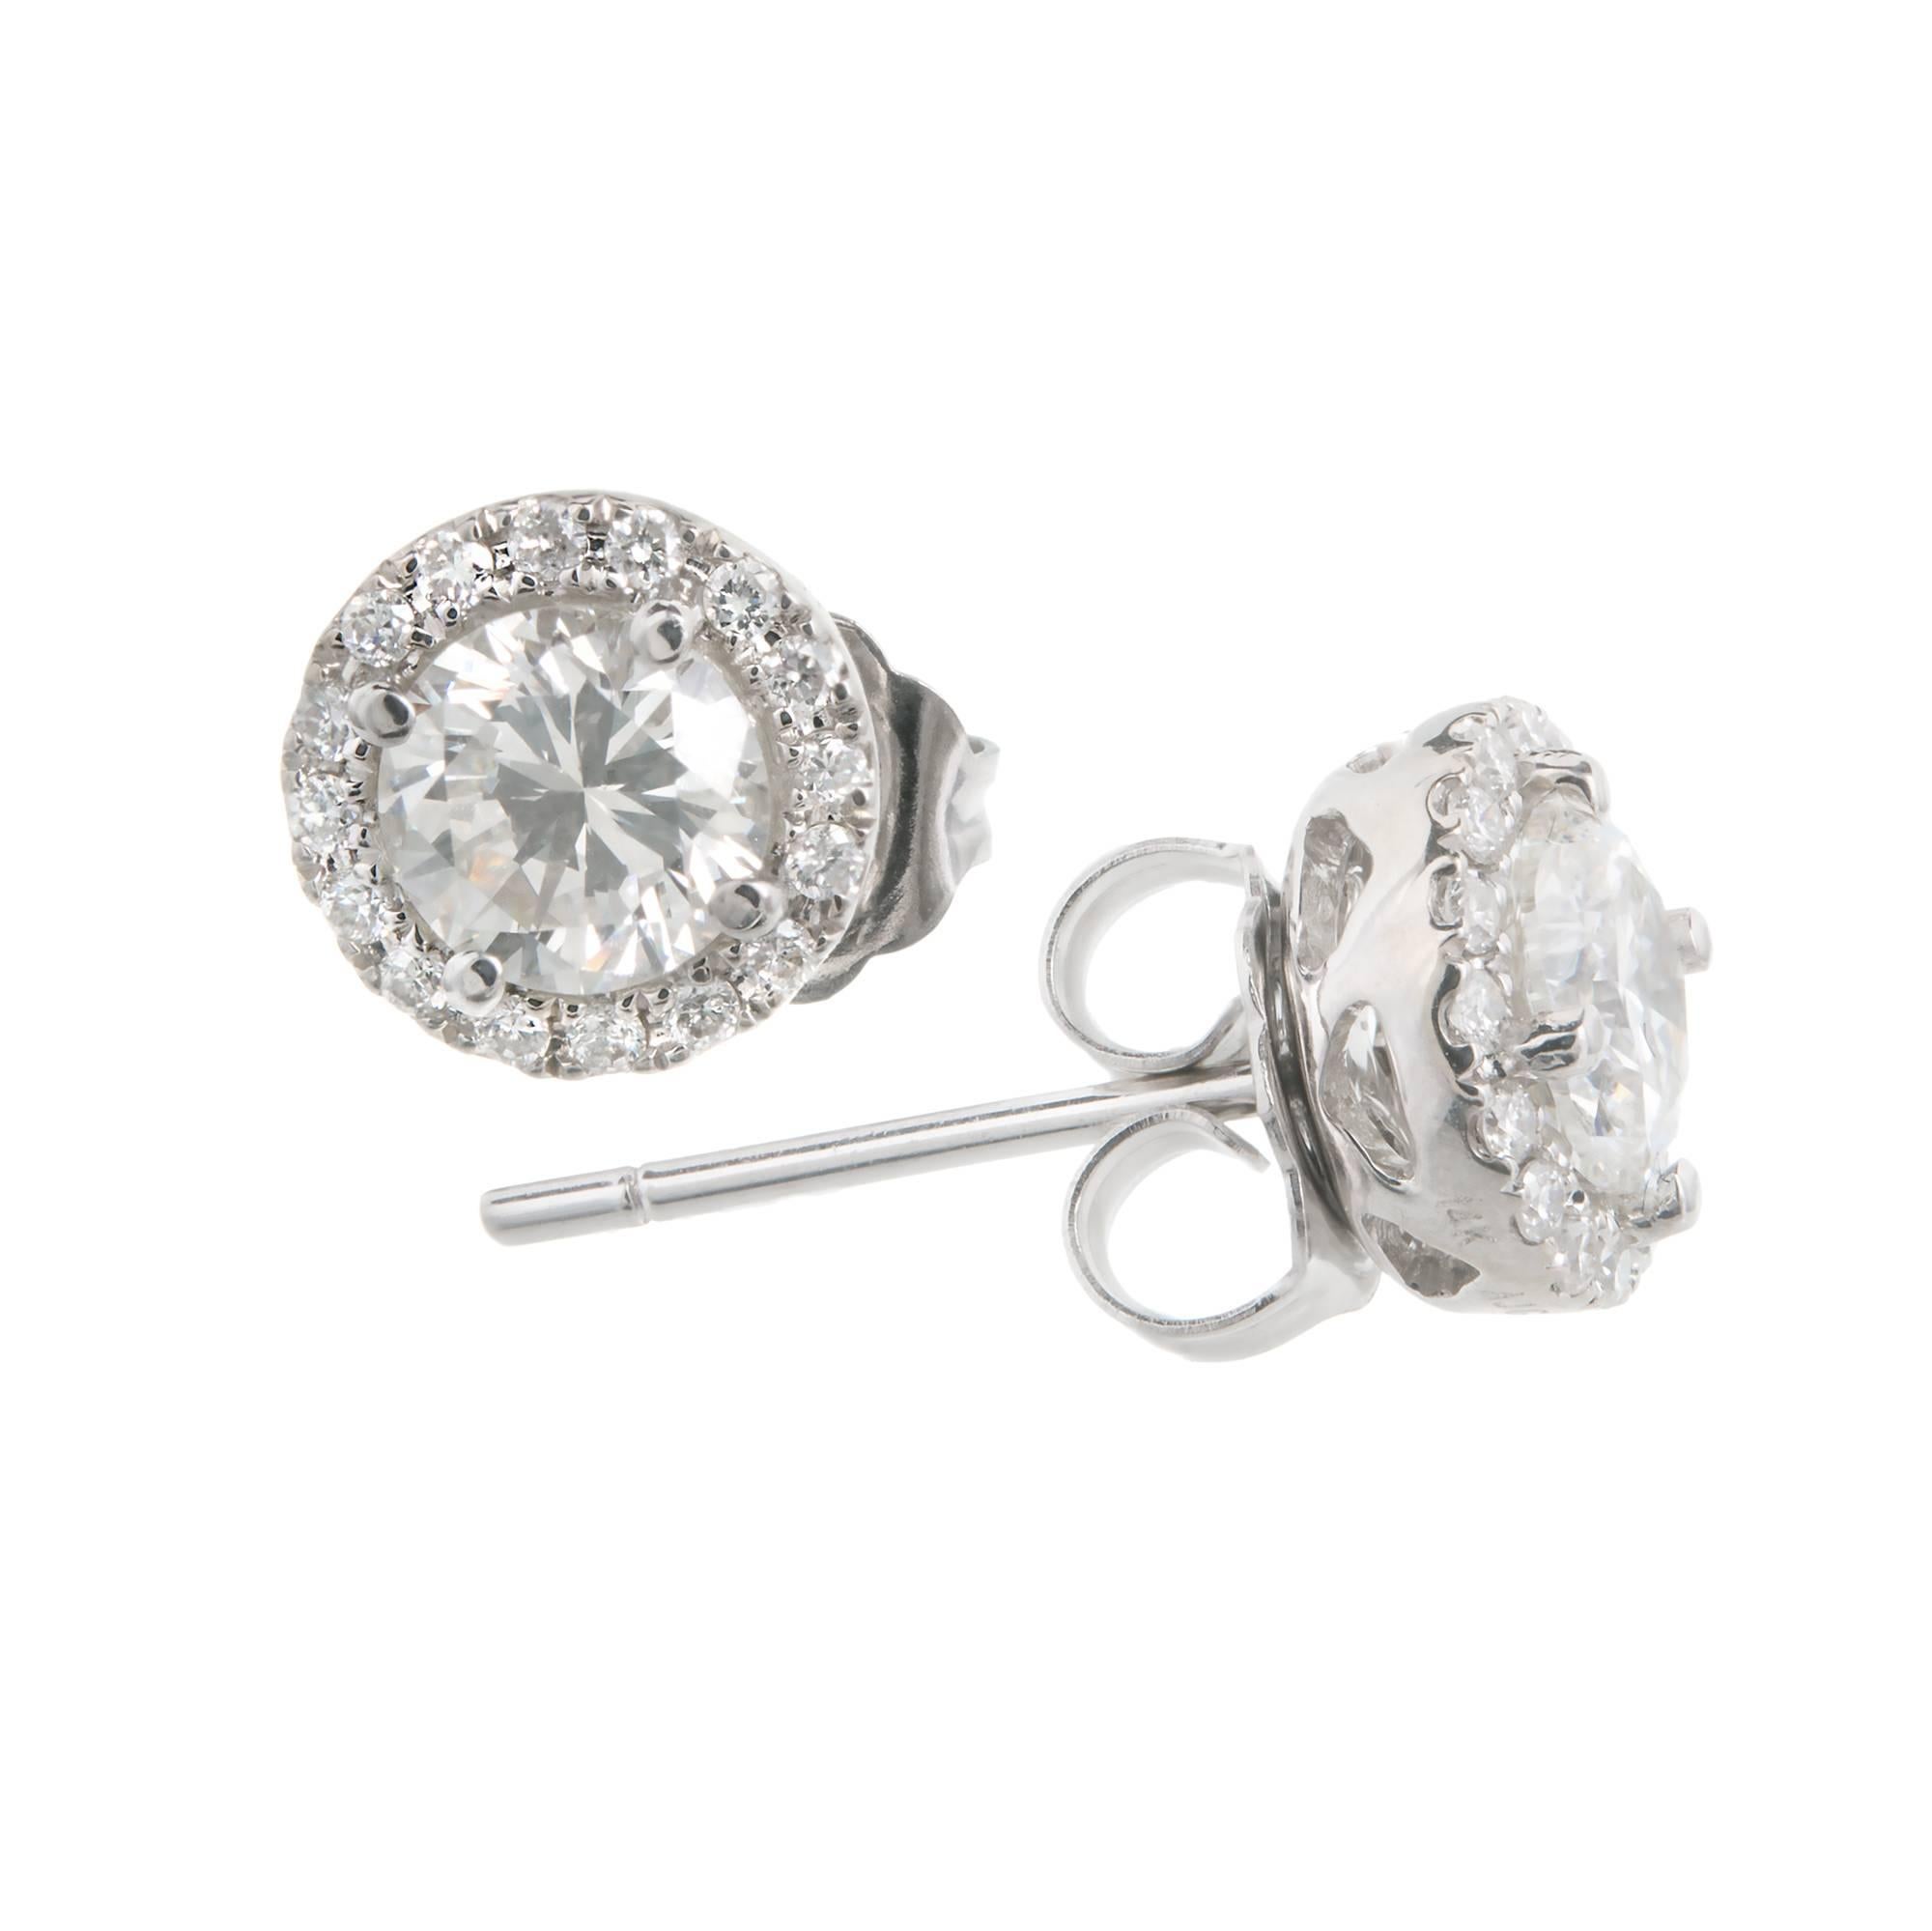 Peter Suchy round halo Diamond earrings with bright white brilliant cut center. Diamonds surrounded by sparkly full cut Diamonds.

2 round Diamonds, approx. total weight .96cts, I, VS2 – SI1
32 round brilliant cut Diamonds, approx. total weight